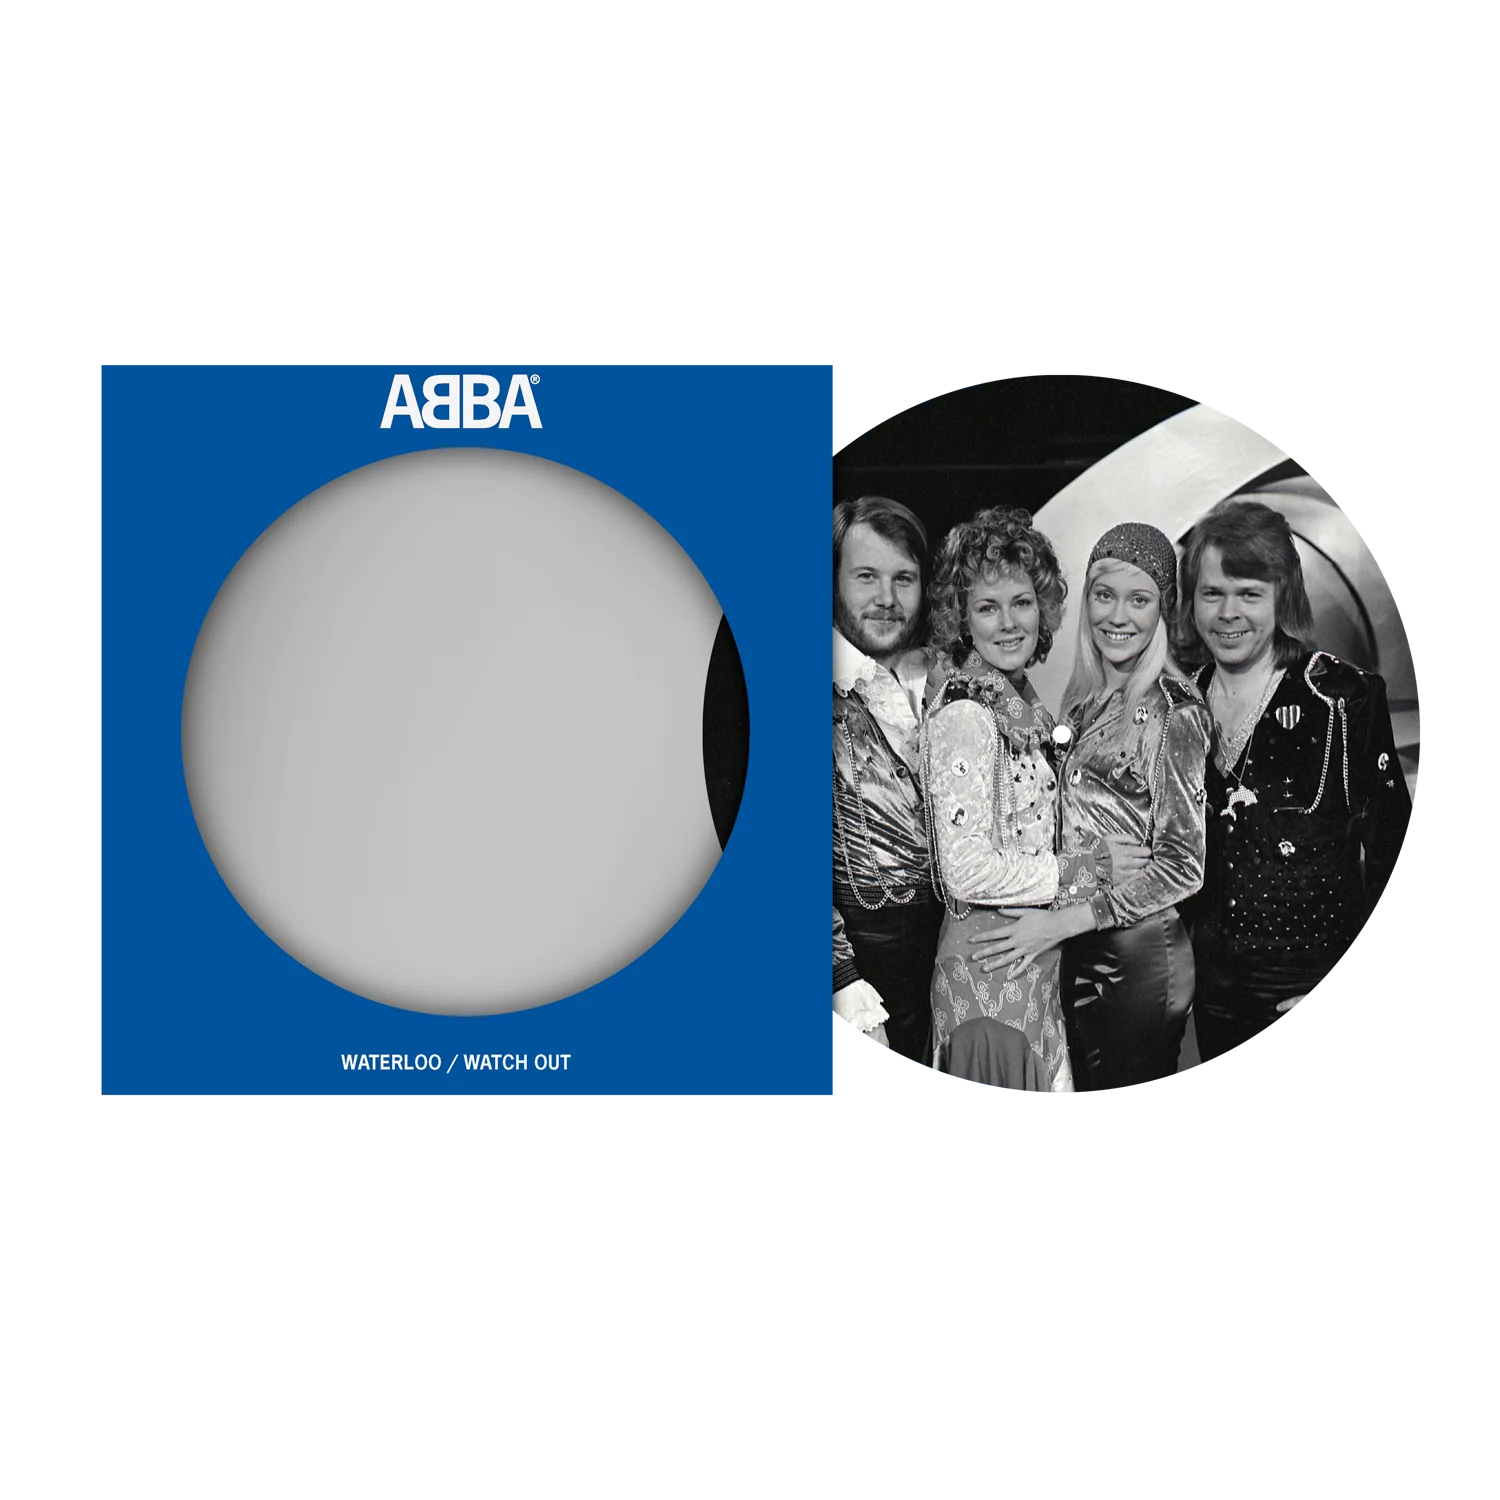 ABBA - Waterloo / Watch Out (7" Picture Disc)